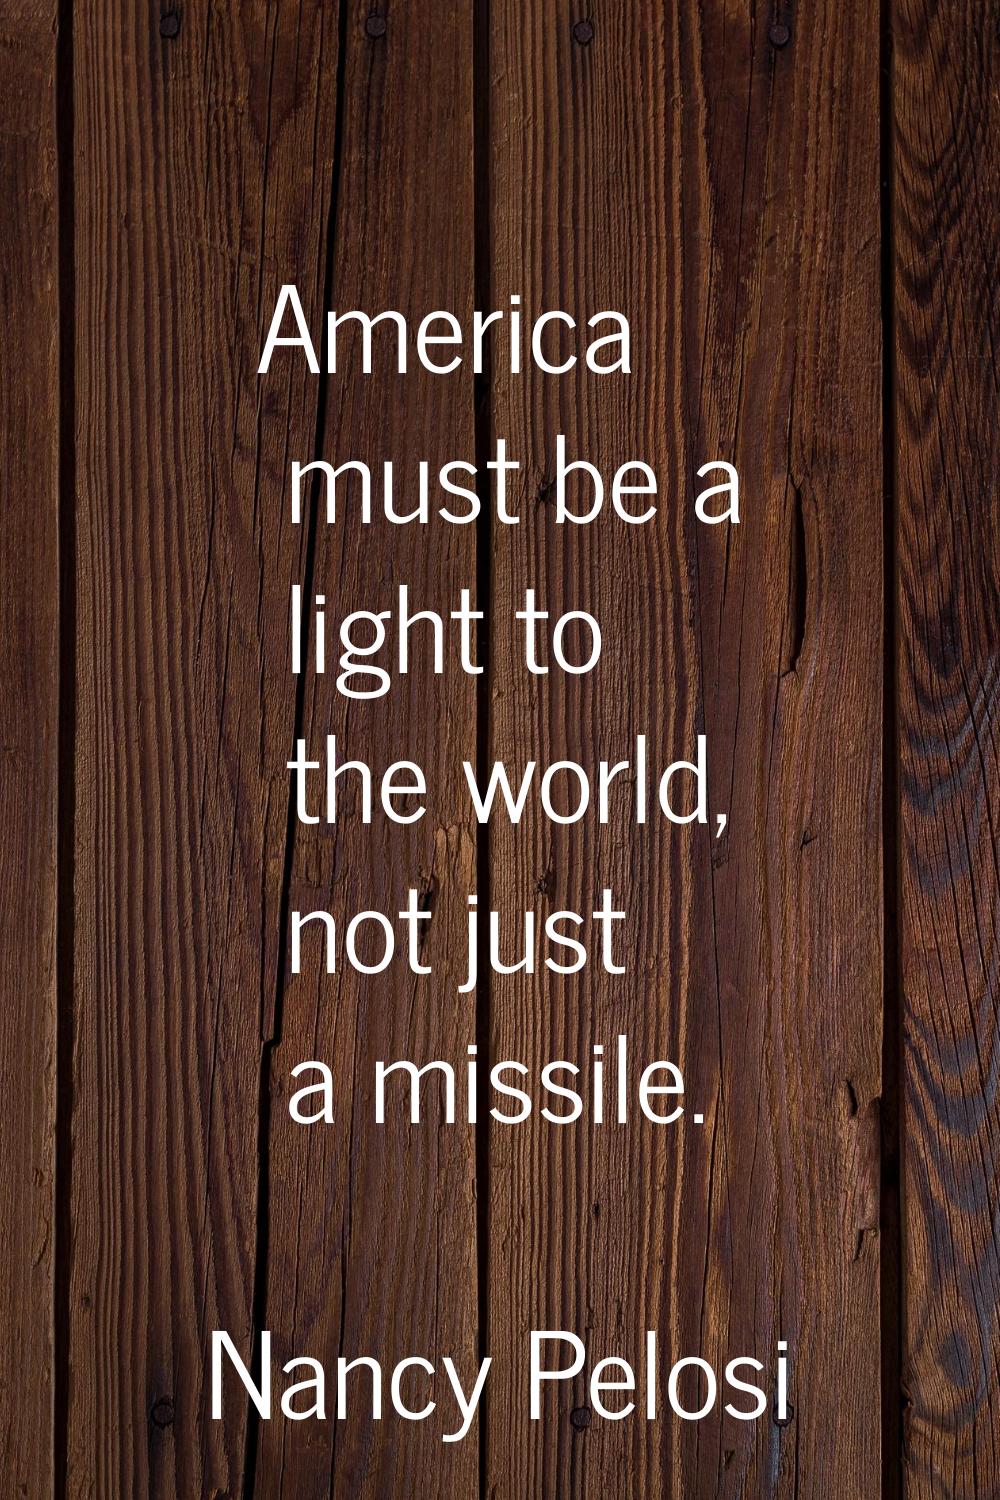 America must be a light to the world, not just a missile.